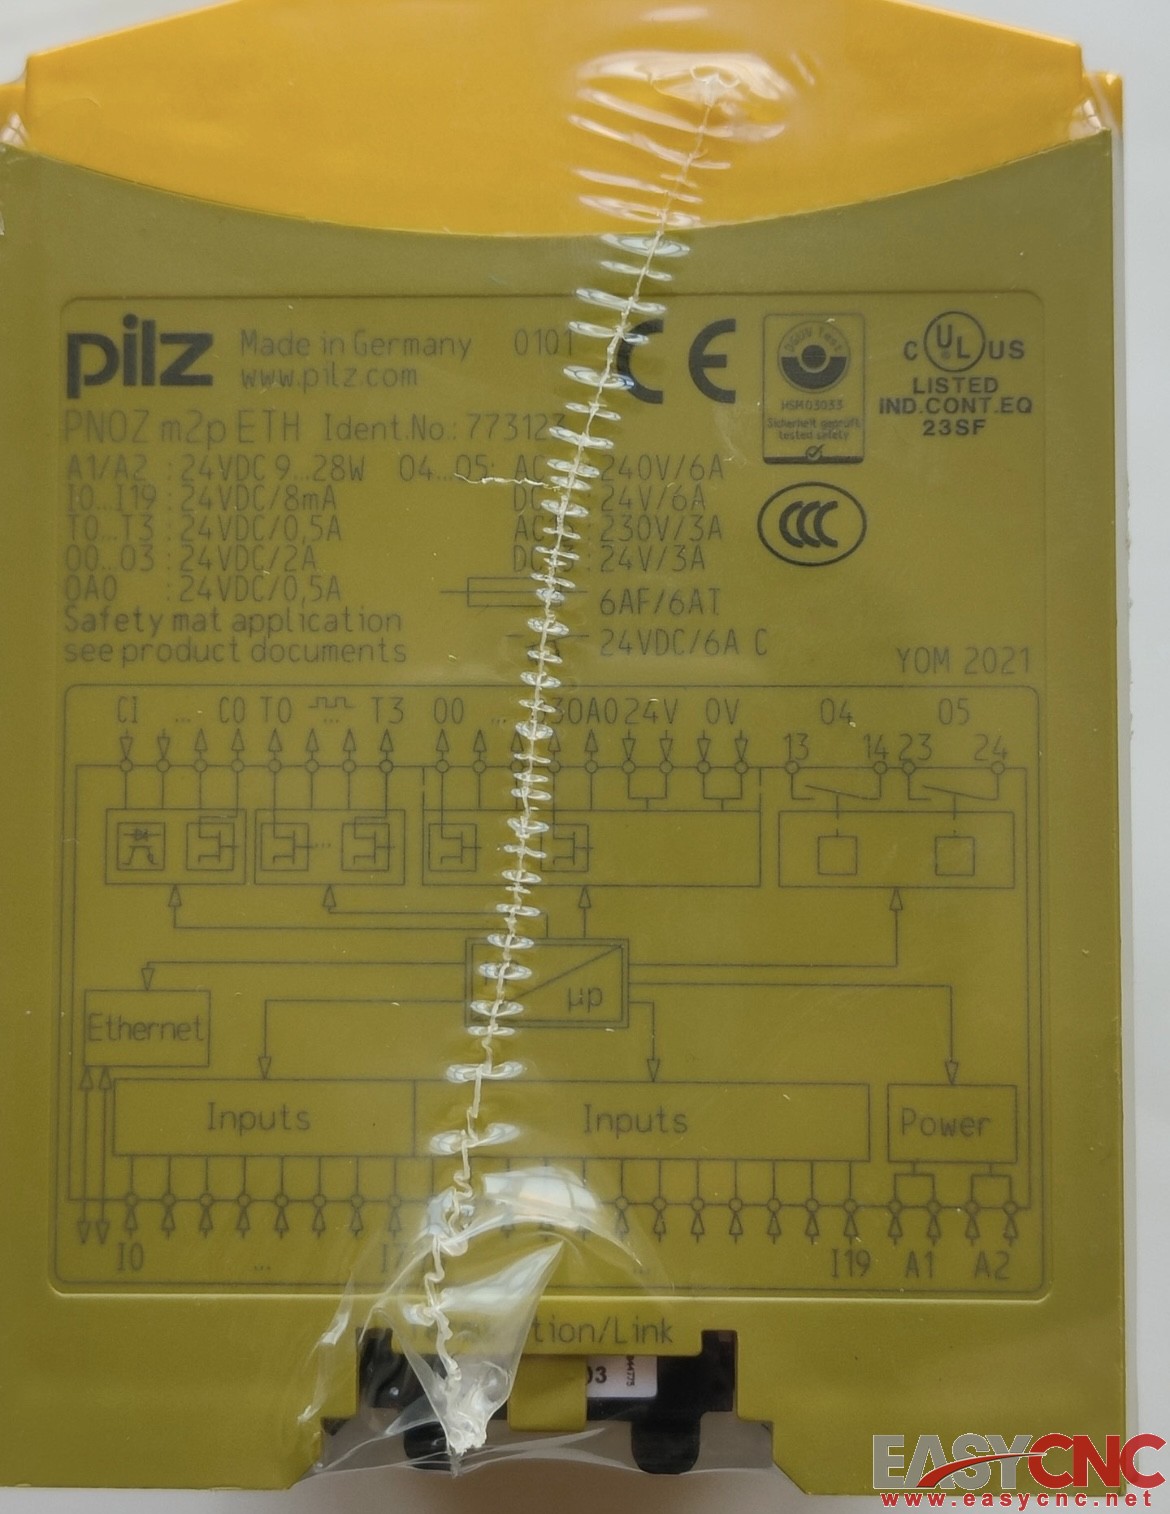 773123 PNOZ m2p ETH Pilz Safety Relay New And Original